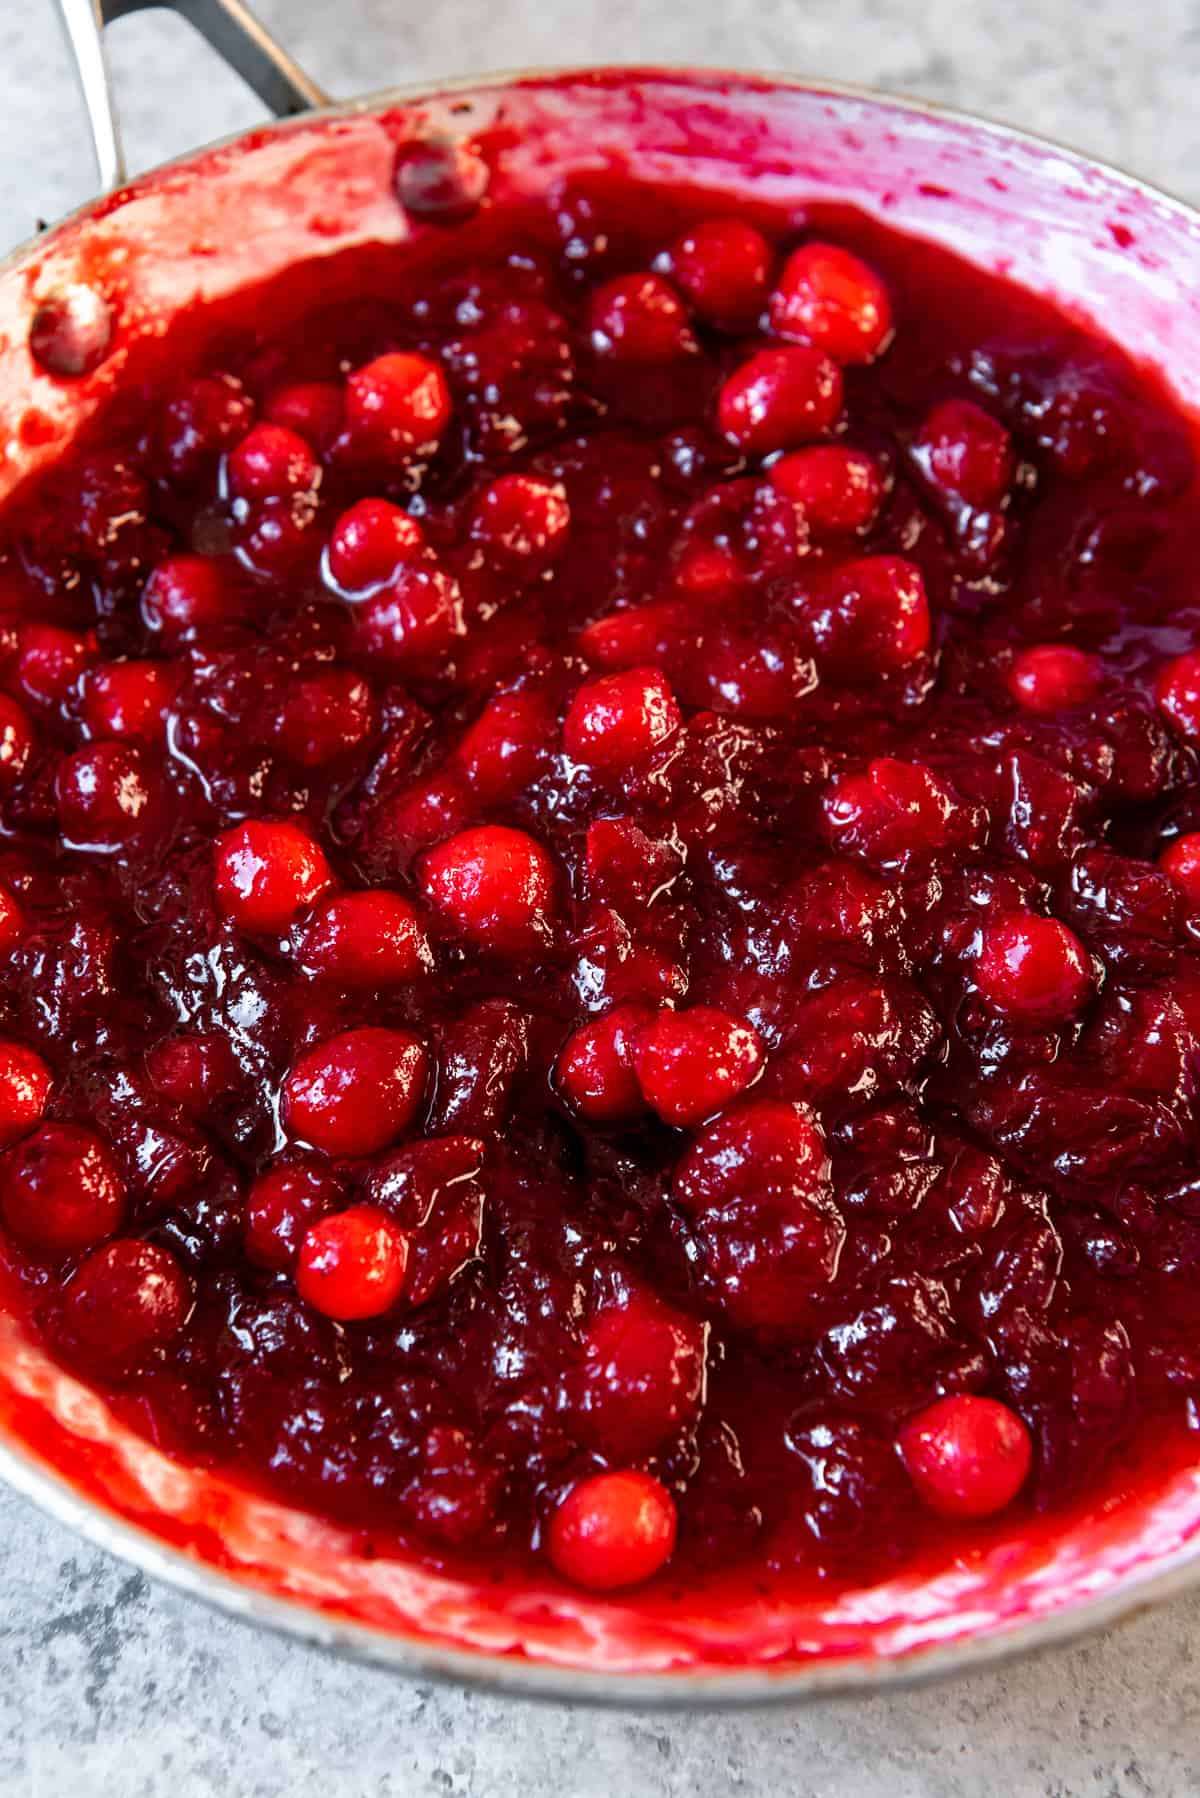 Top view of cranberries in a saucepan that have cooked down and burst into a jellied sauce.